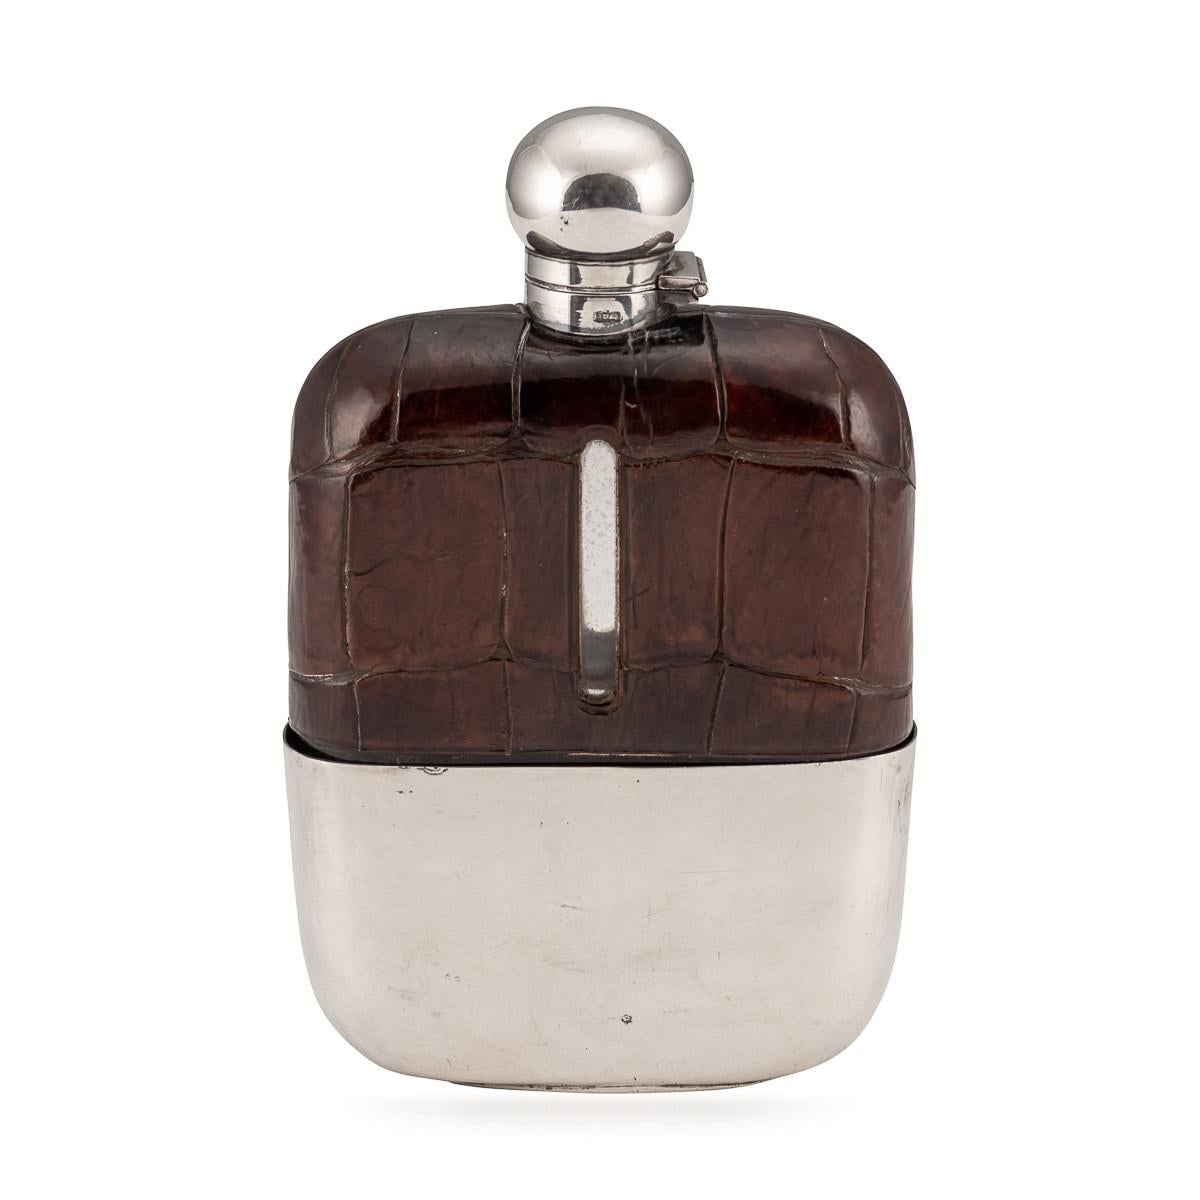 A stunning hip flask made by James Dixon and Sons. Made out of glass and then mounted with crocodile leather with a silver plated bayonet locking mechanism and removable cup, these hip flasks were extremely popular around the turn of the last